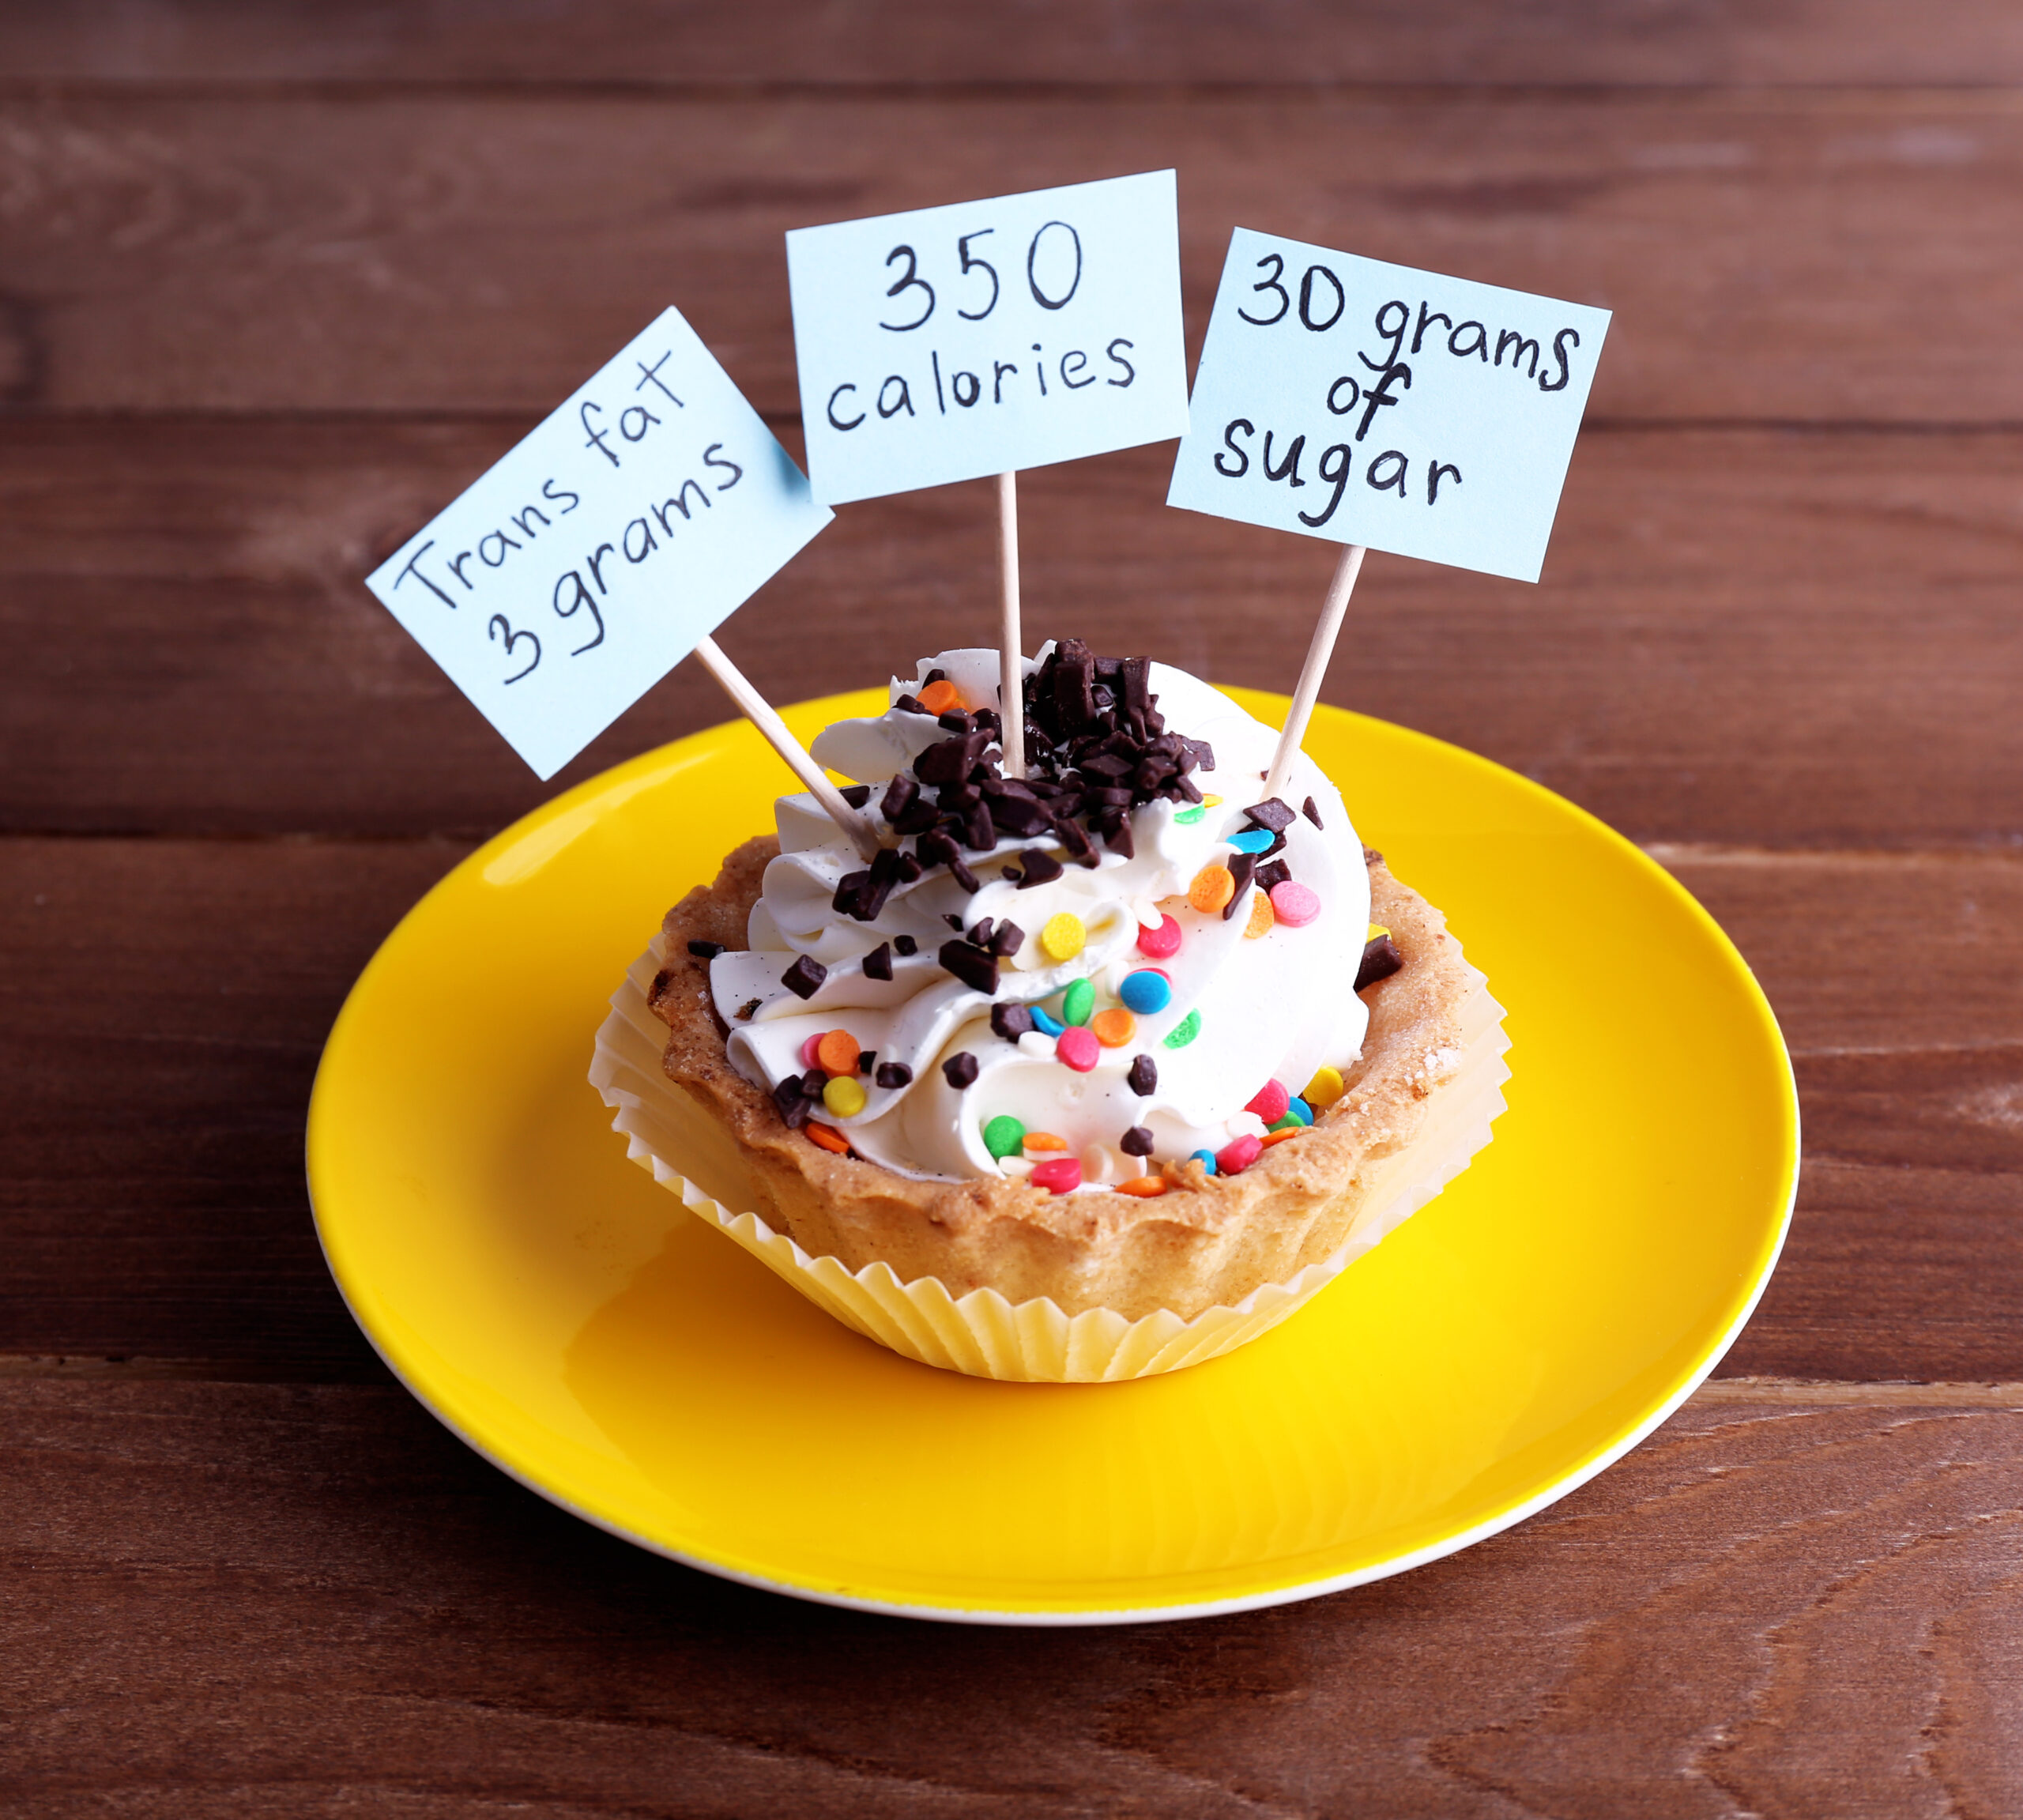 Sloppy calorie counting can still help you lose weight